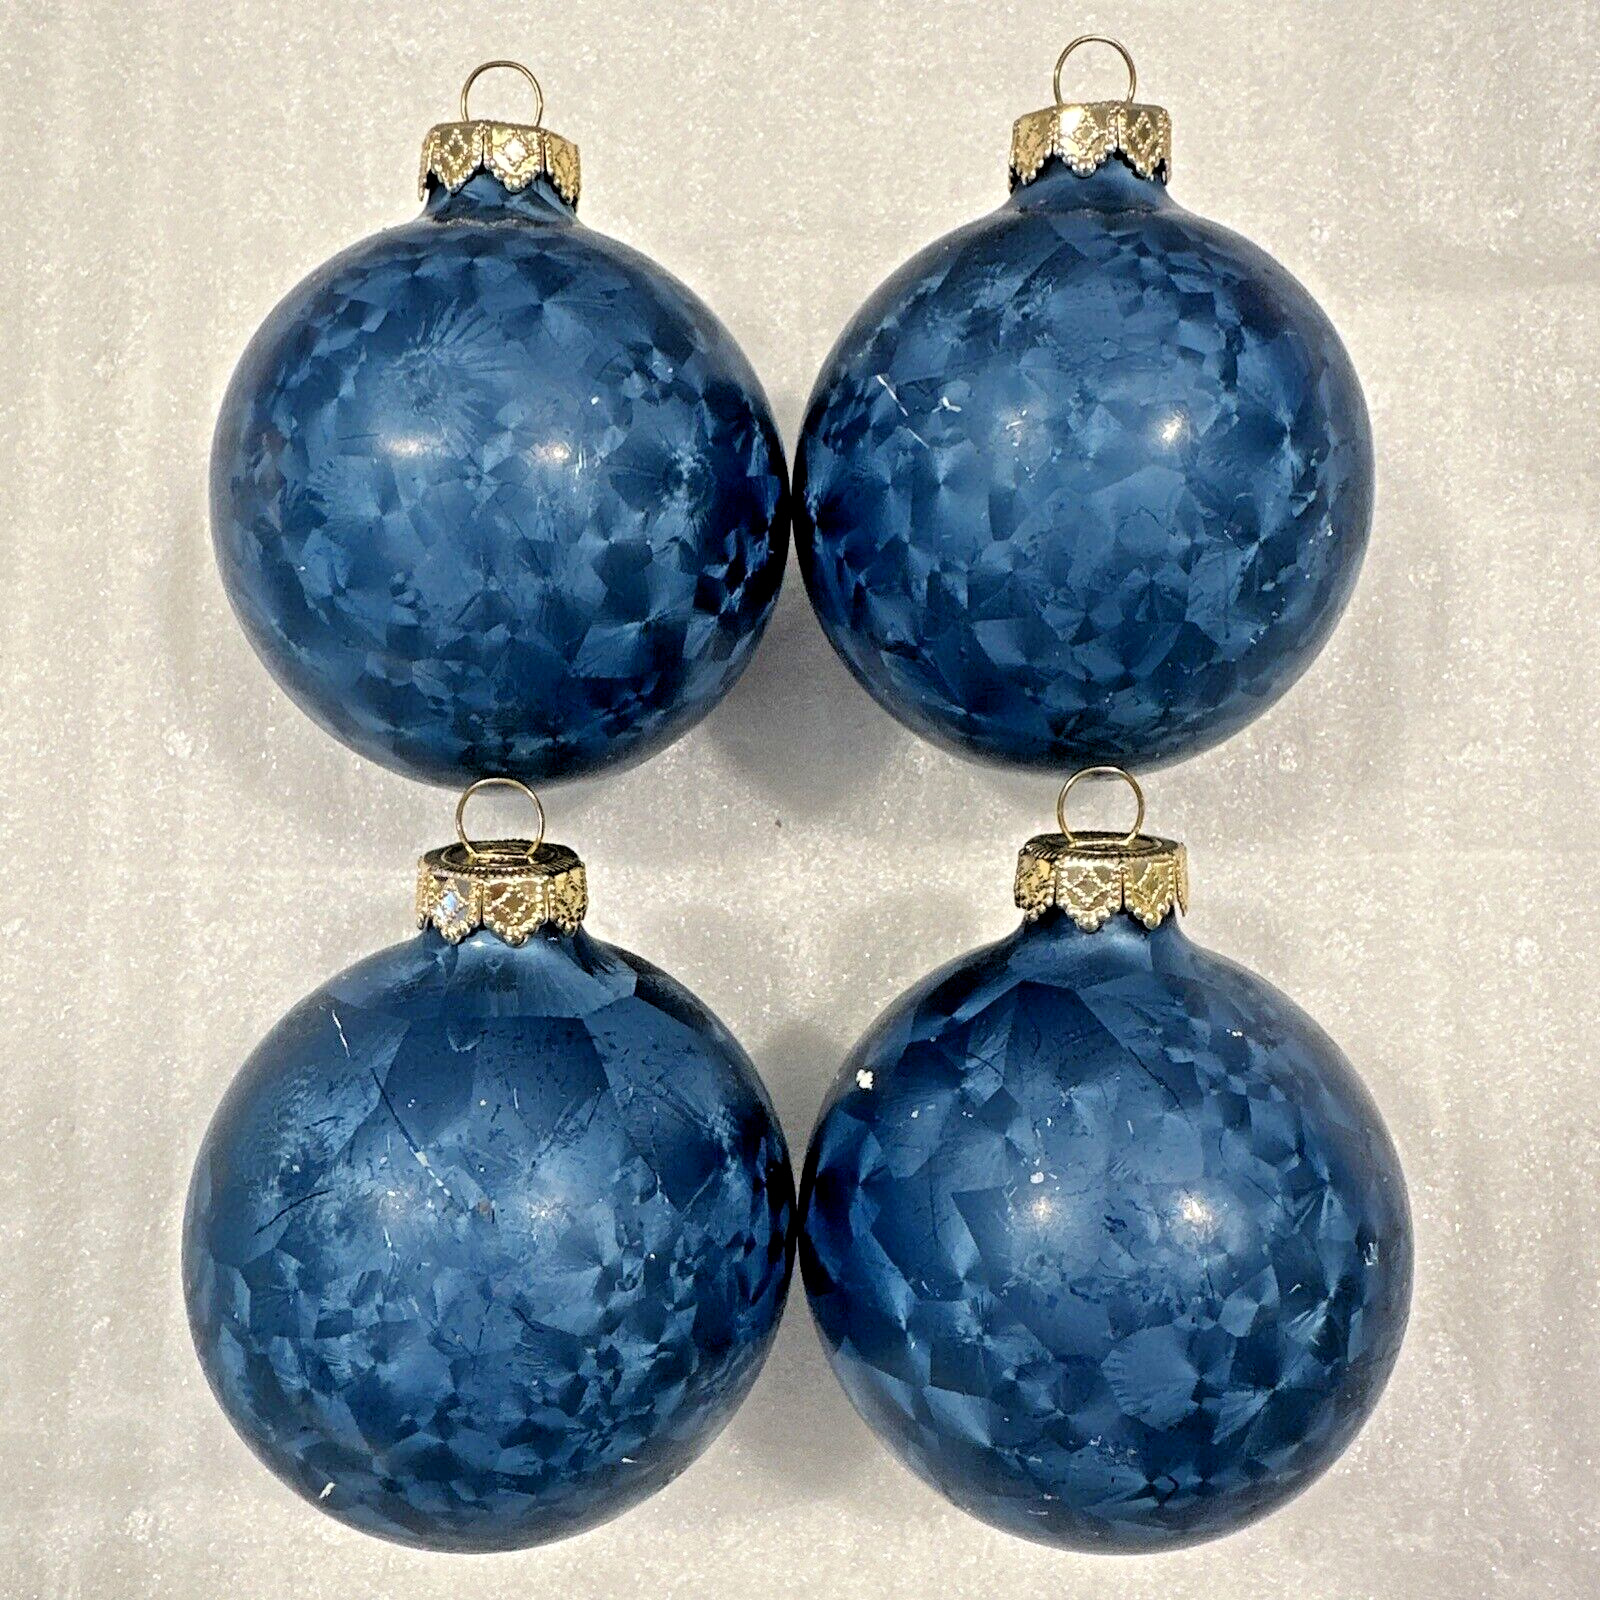 Set of 4 Vintage HD Blue Frosted Glass Christmas Ornaments Silver Crowns 2.5\